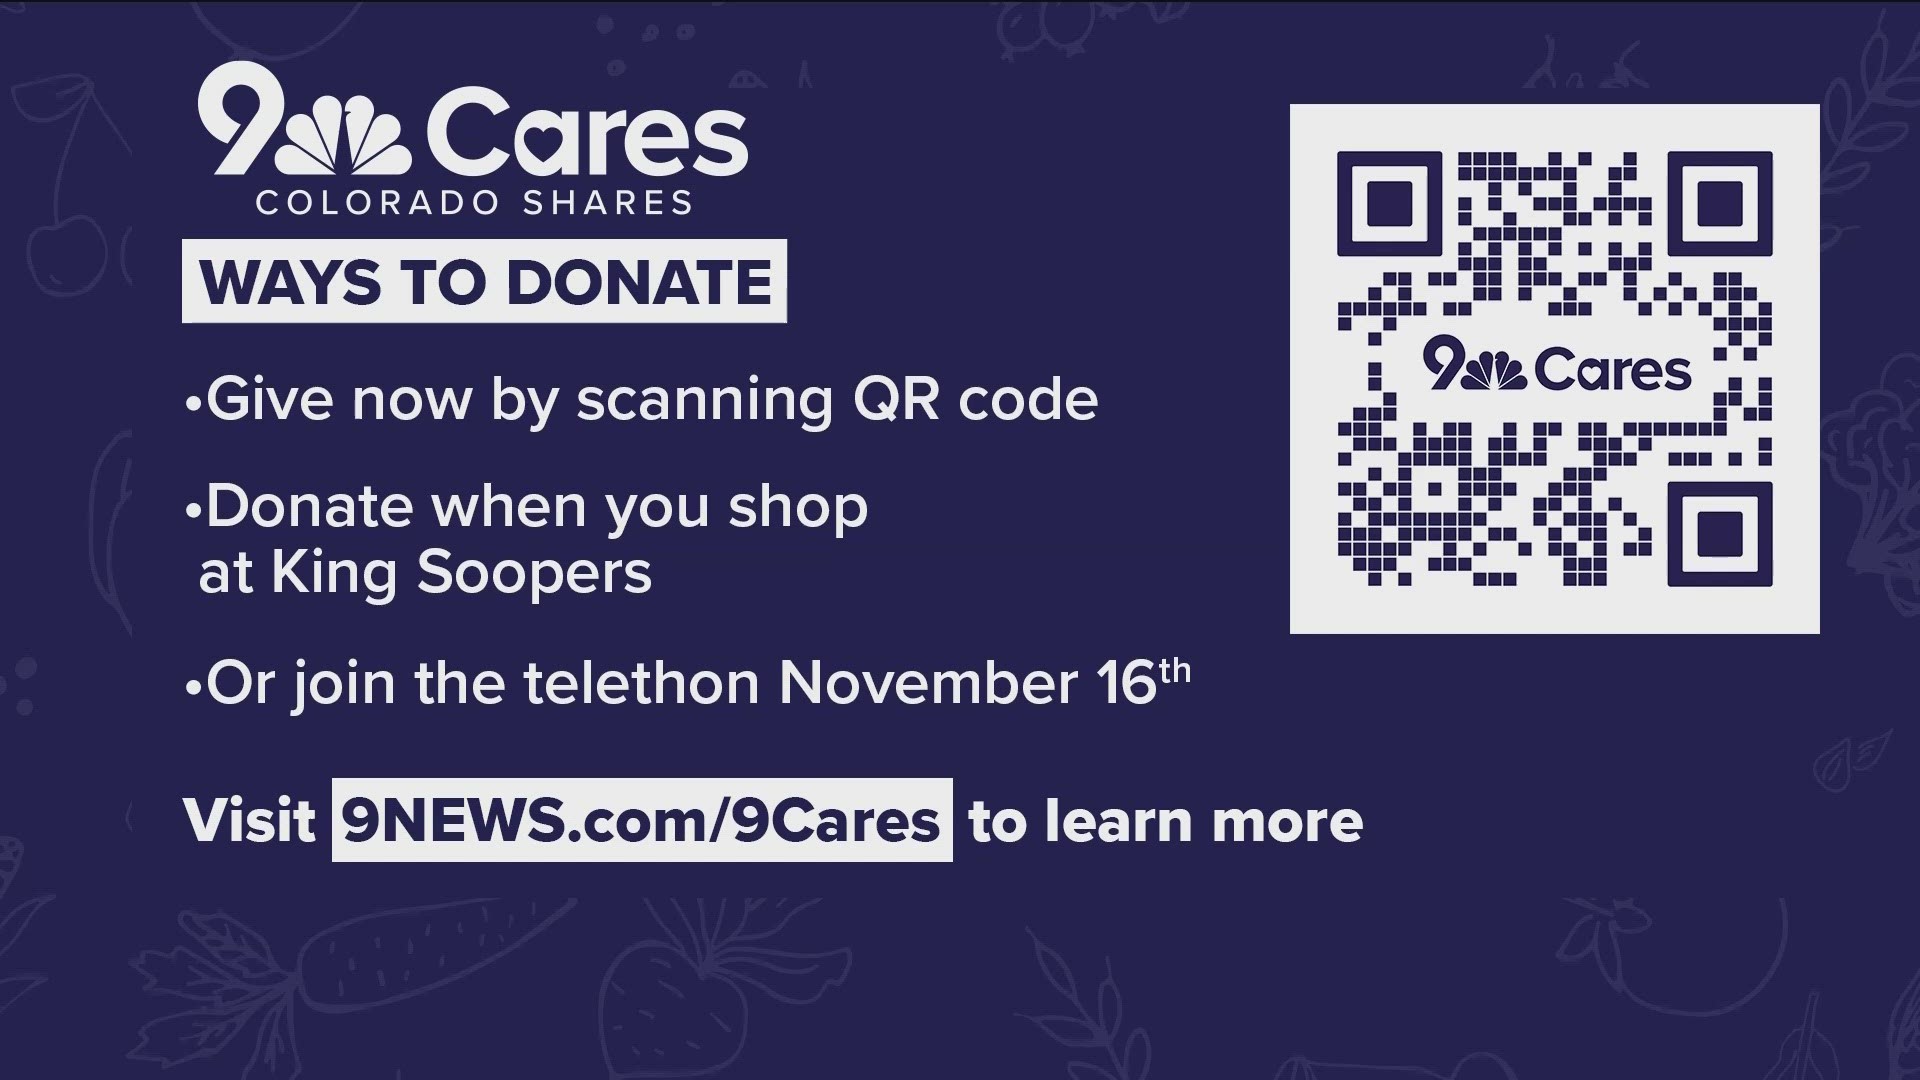 Scan the QR Code to donate and help your neighbors in need. 9News.com/9Cares has more.